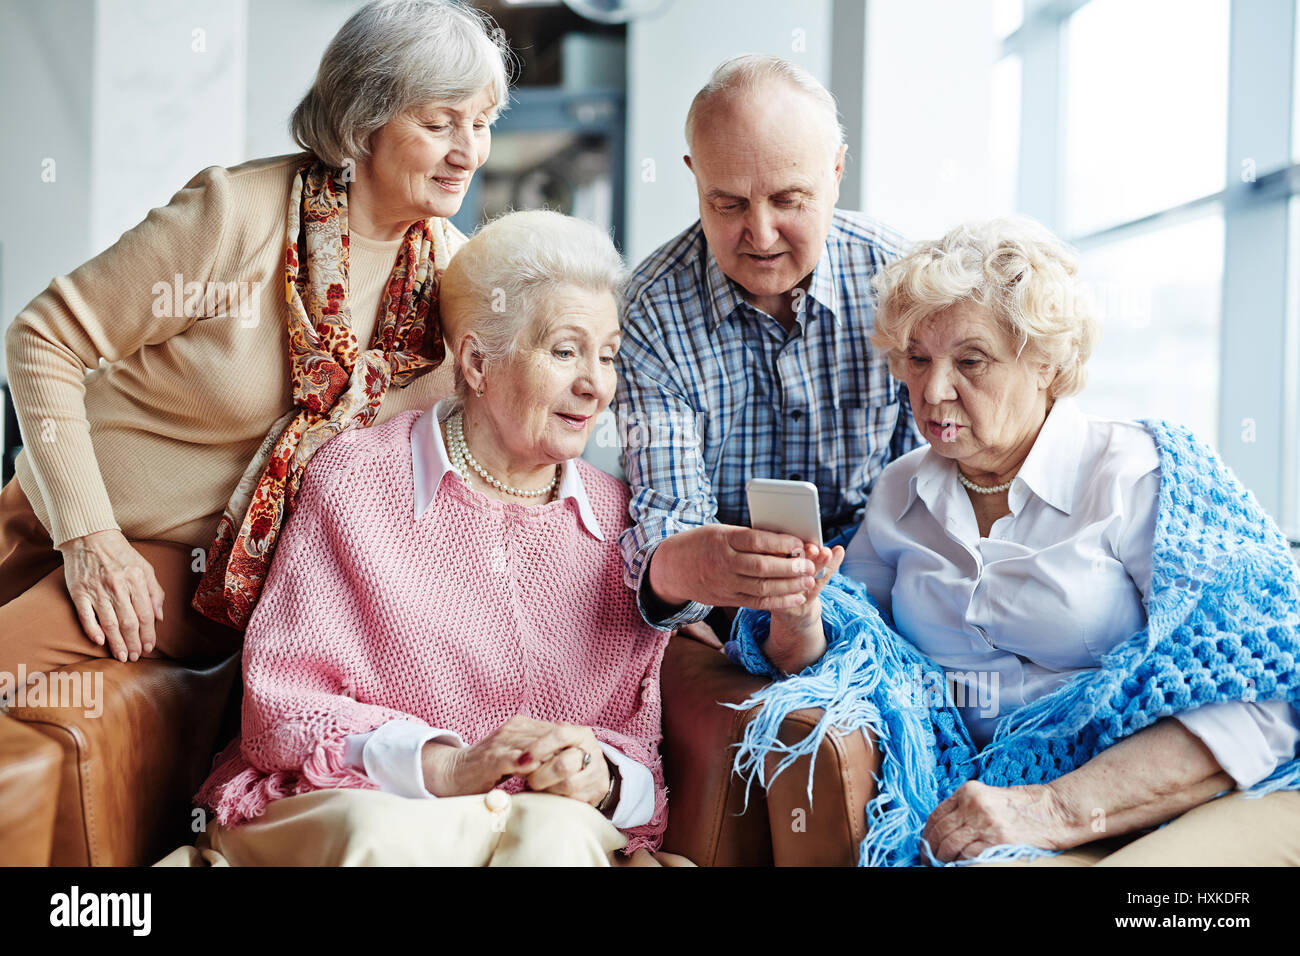 Group of senior people with smartphone Stock Photo